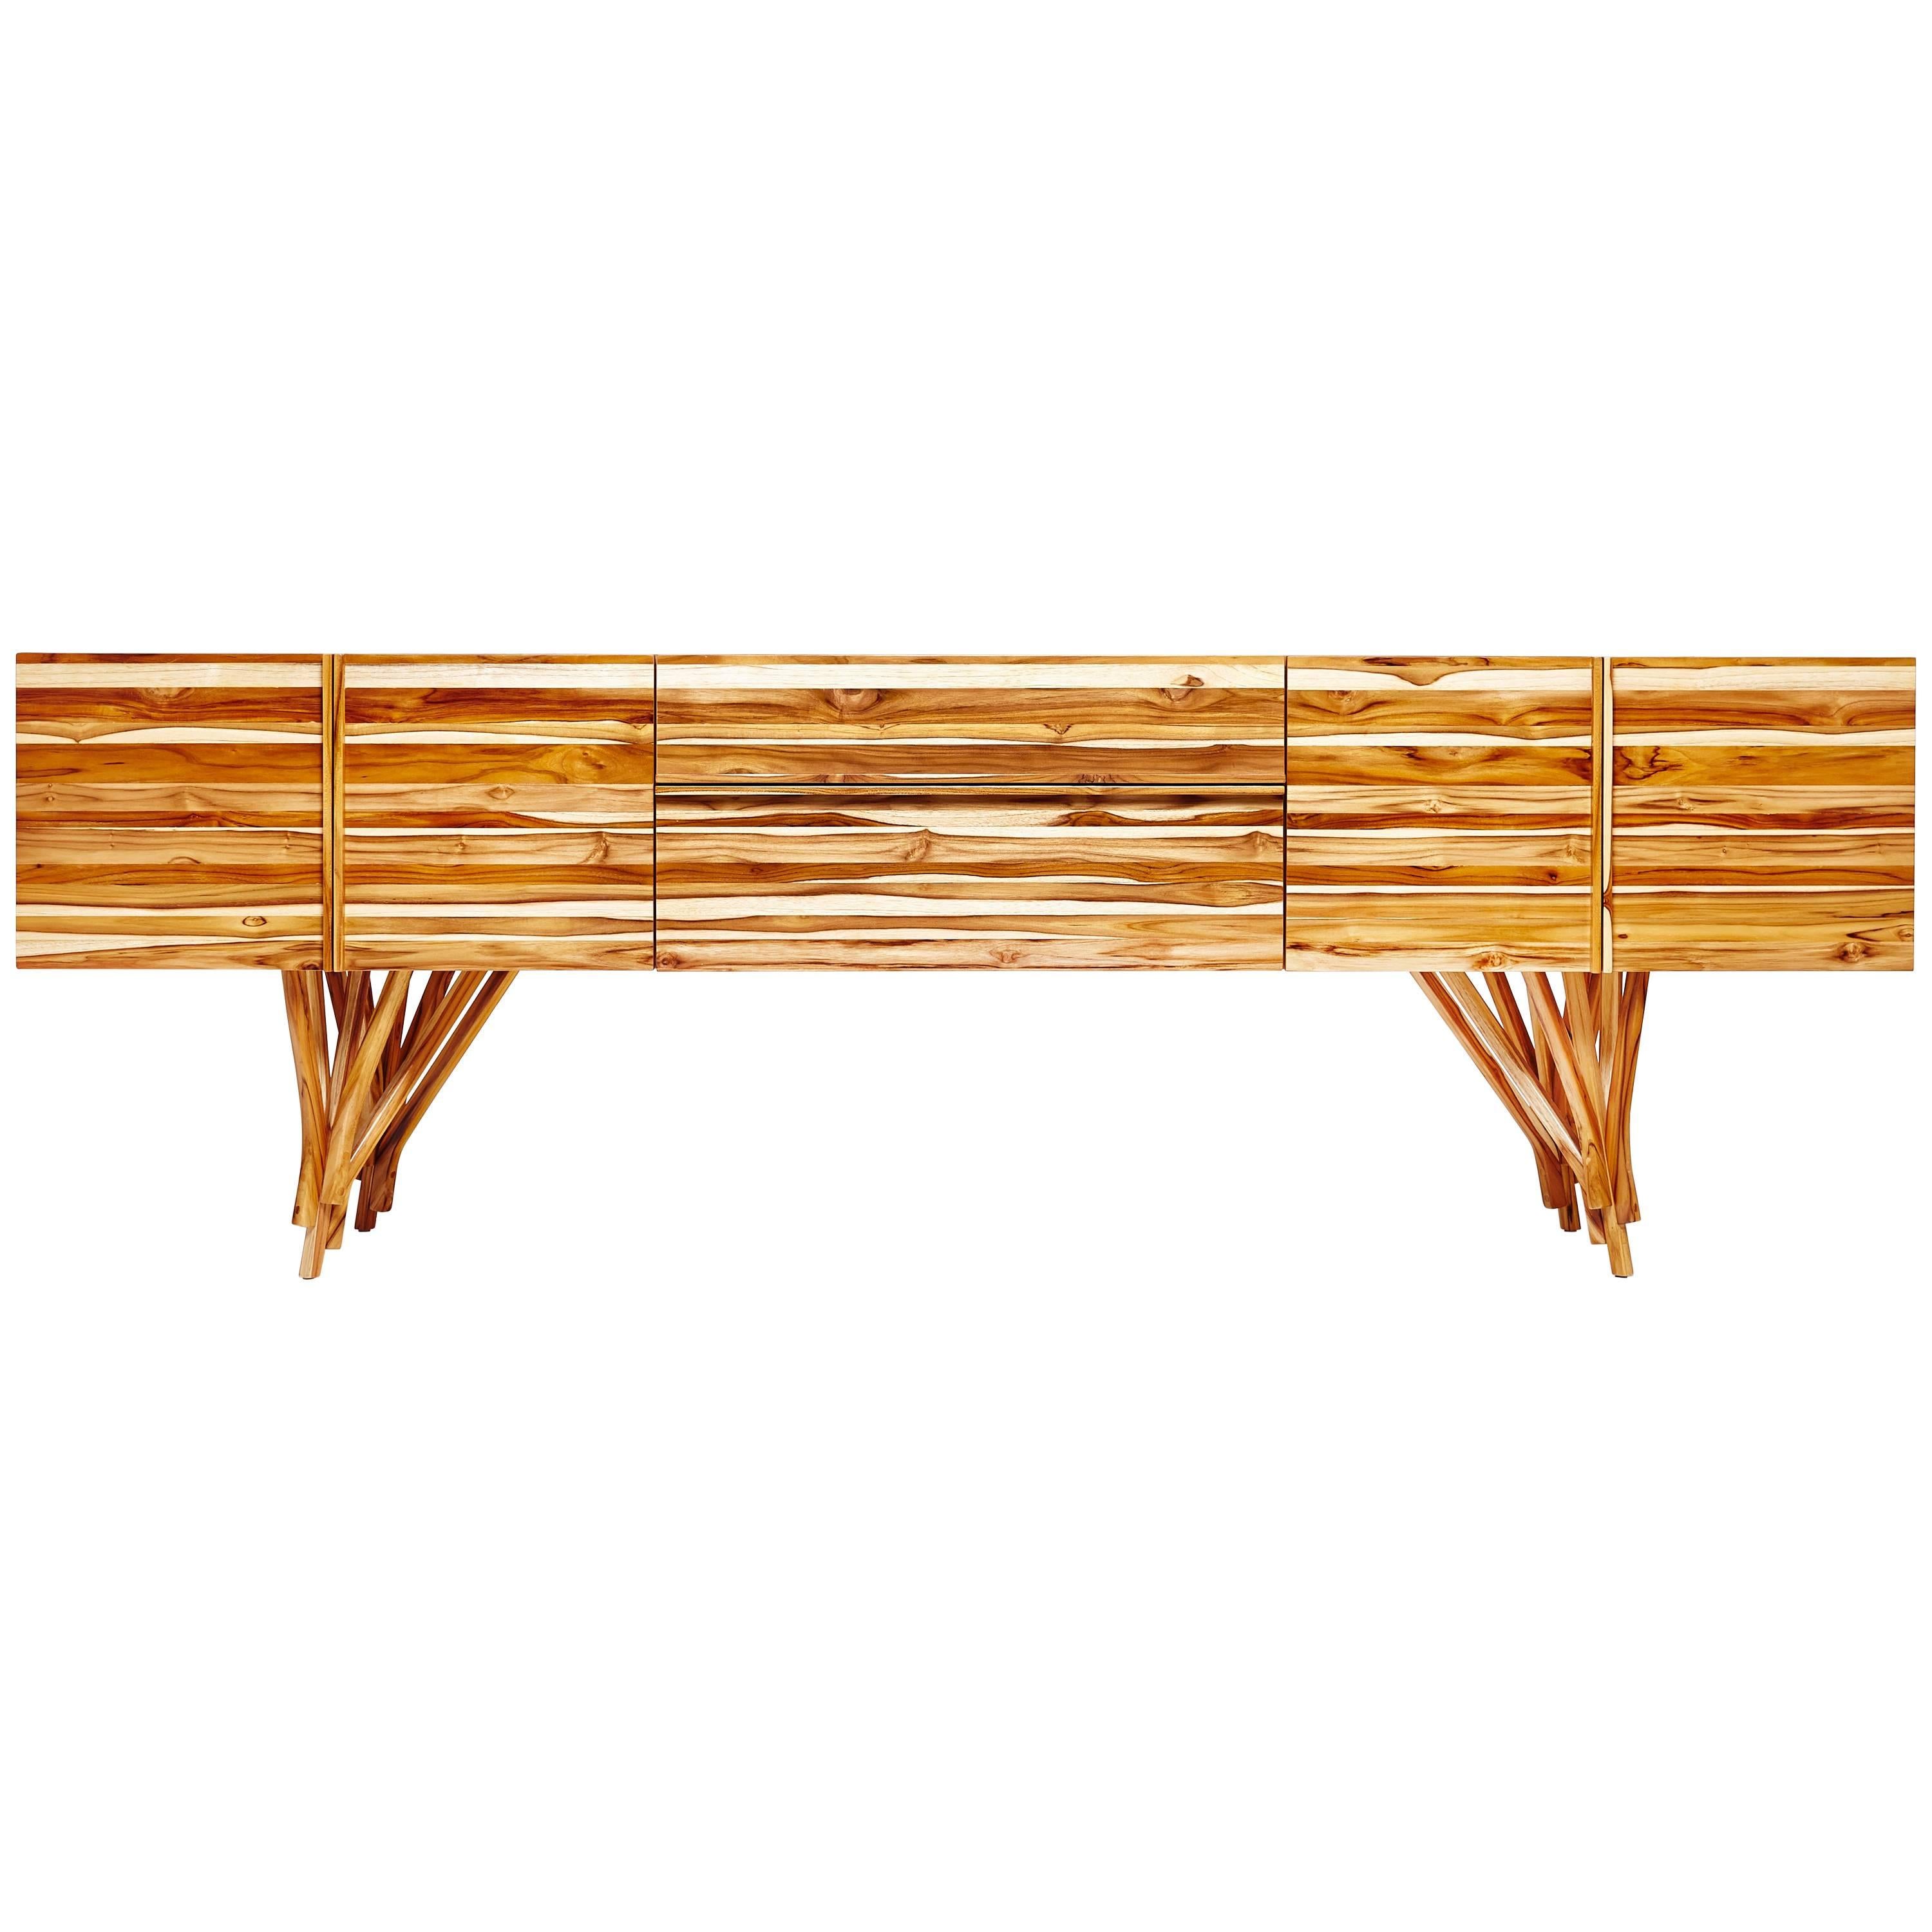 Guaimbê Credenza by Paulo Alves, Handcrafted in Brazil For Sale